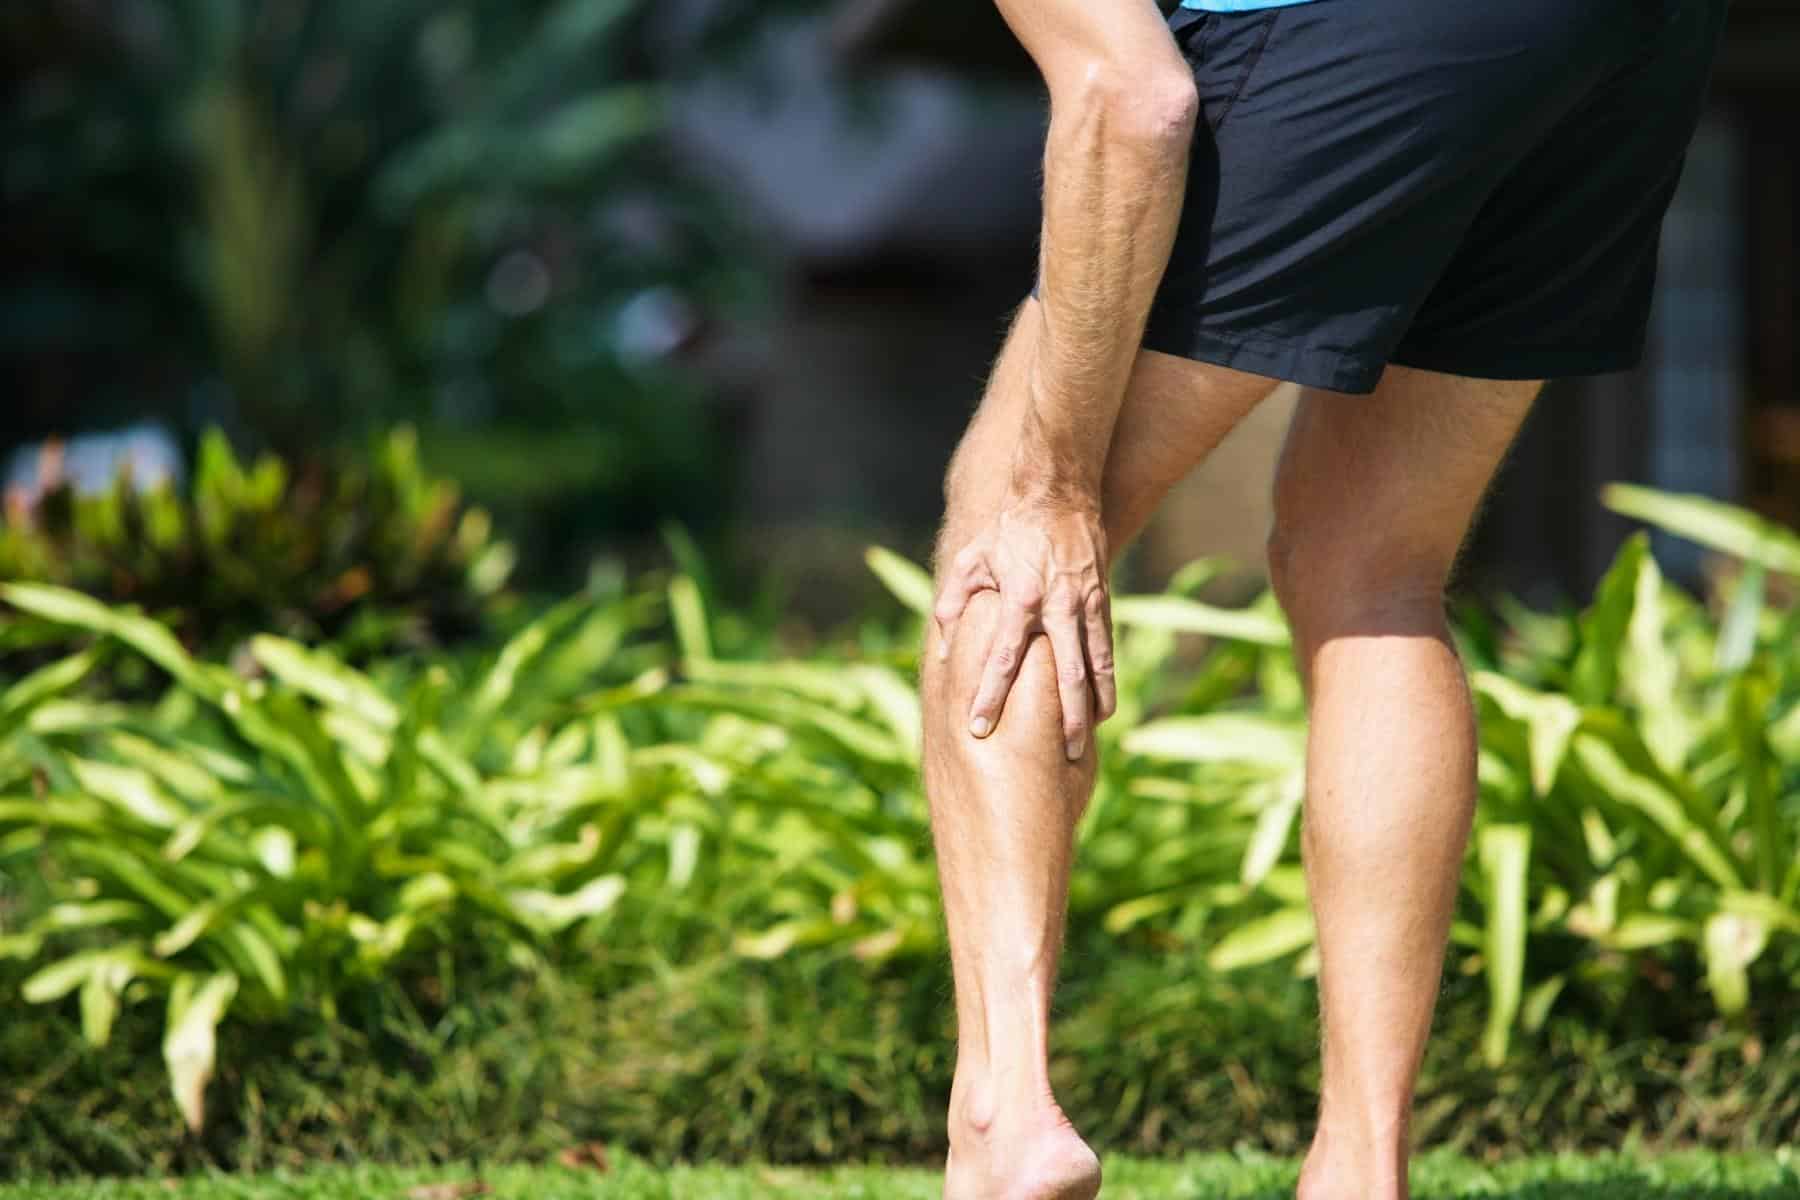 Calf Muscle Strains: Exercises for Your Best Recovery - BSR Physical Therapy